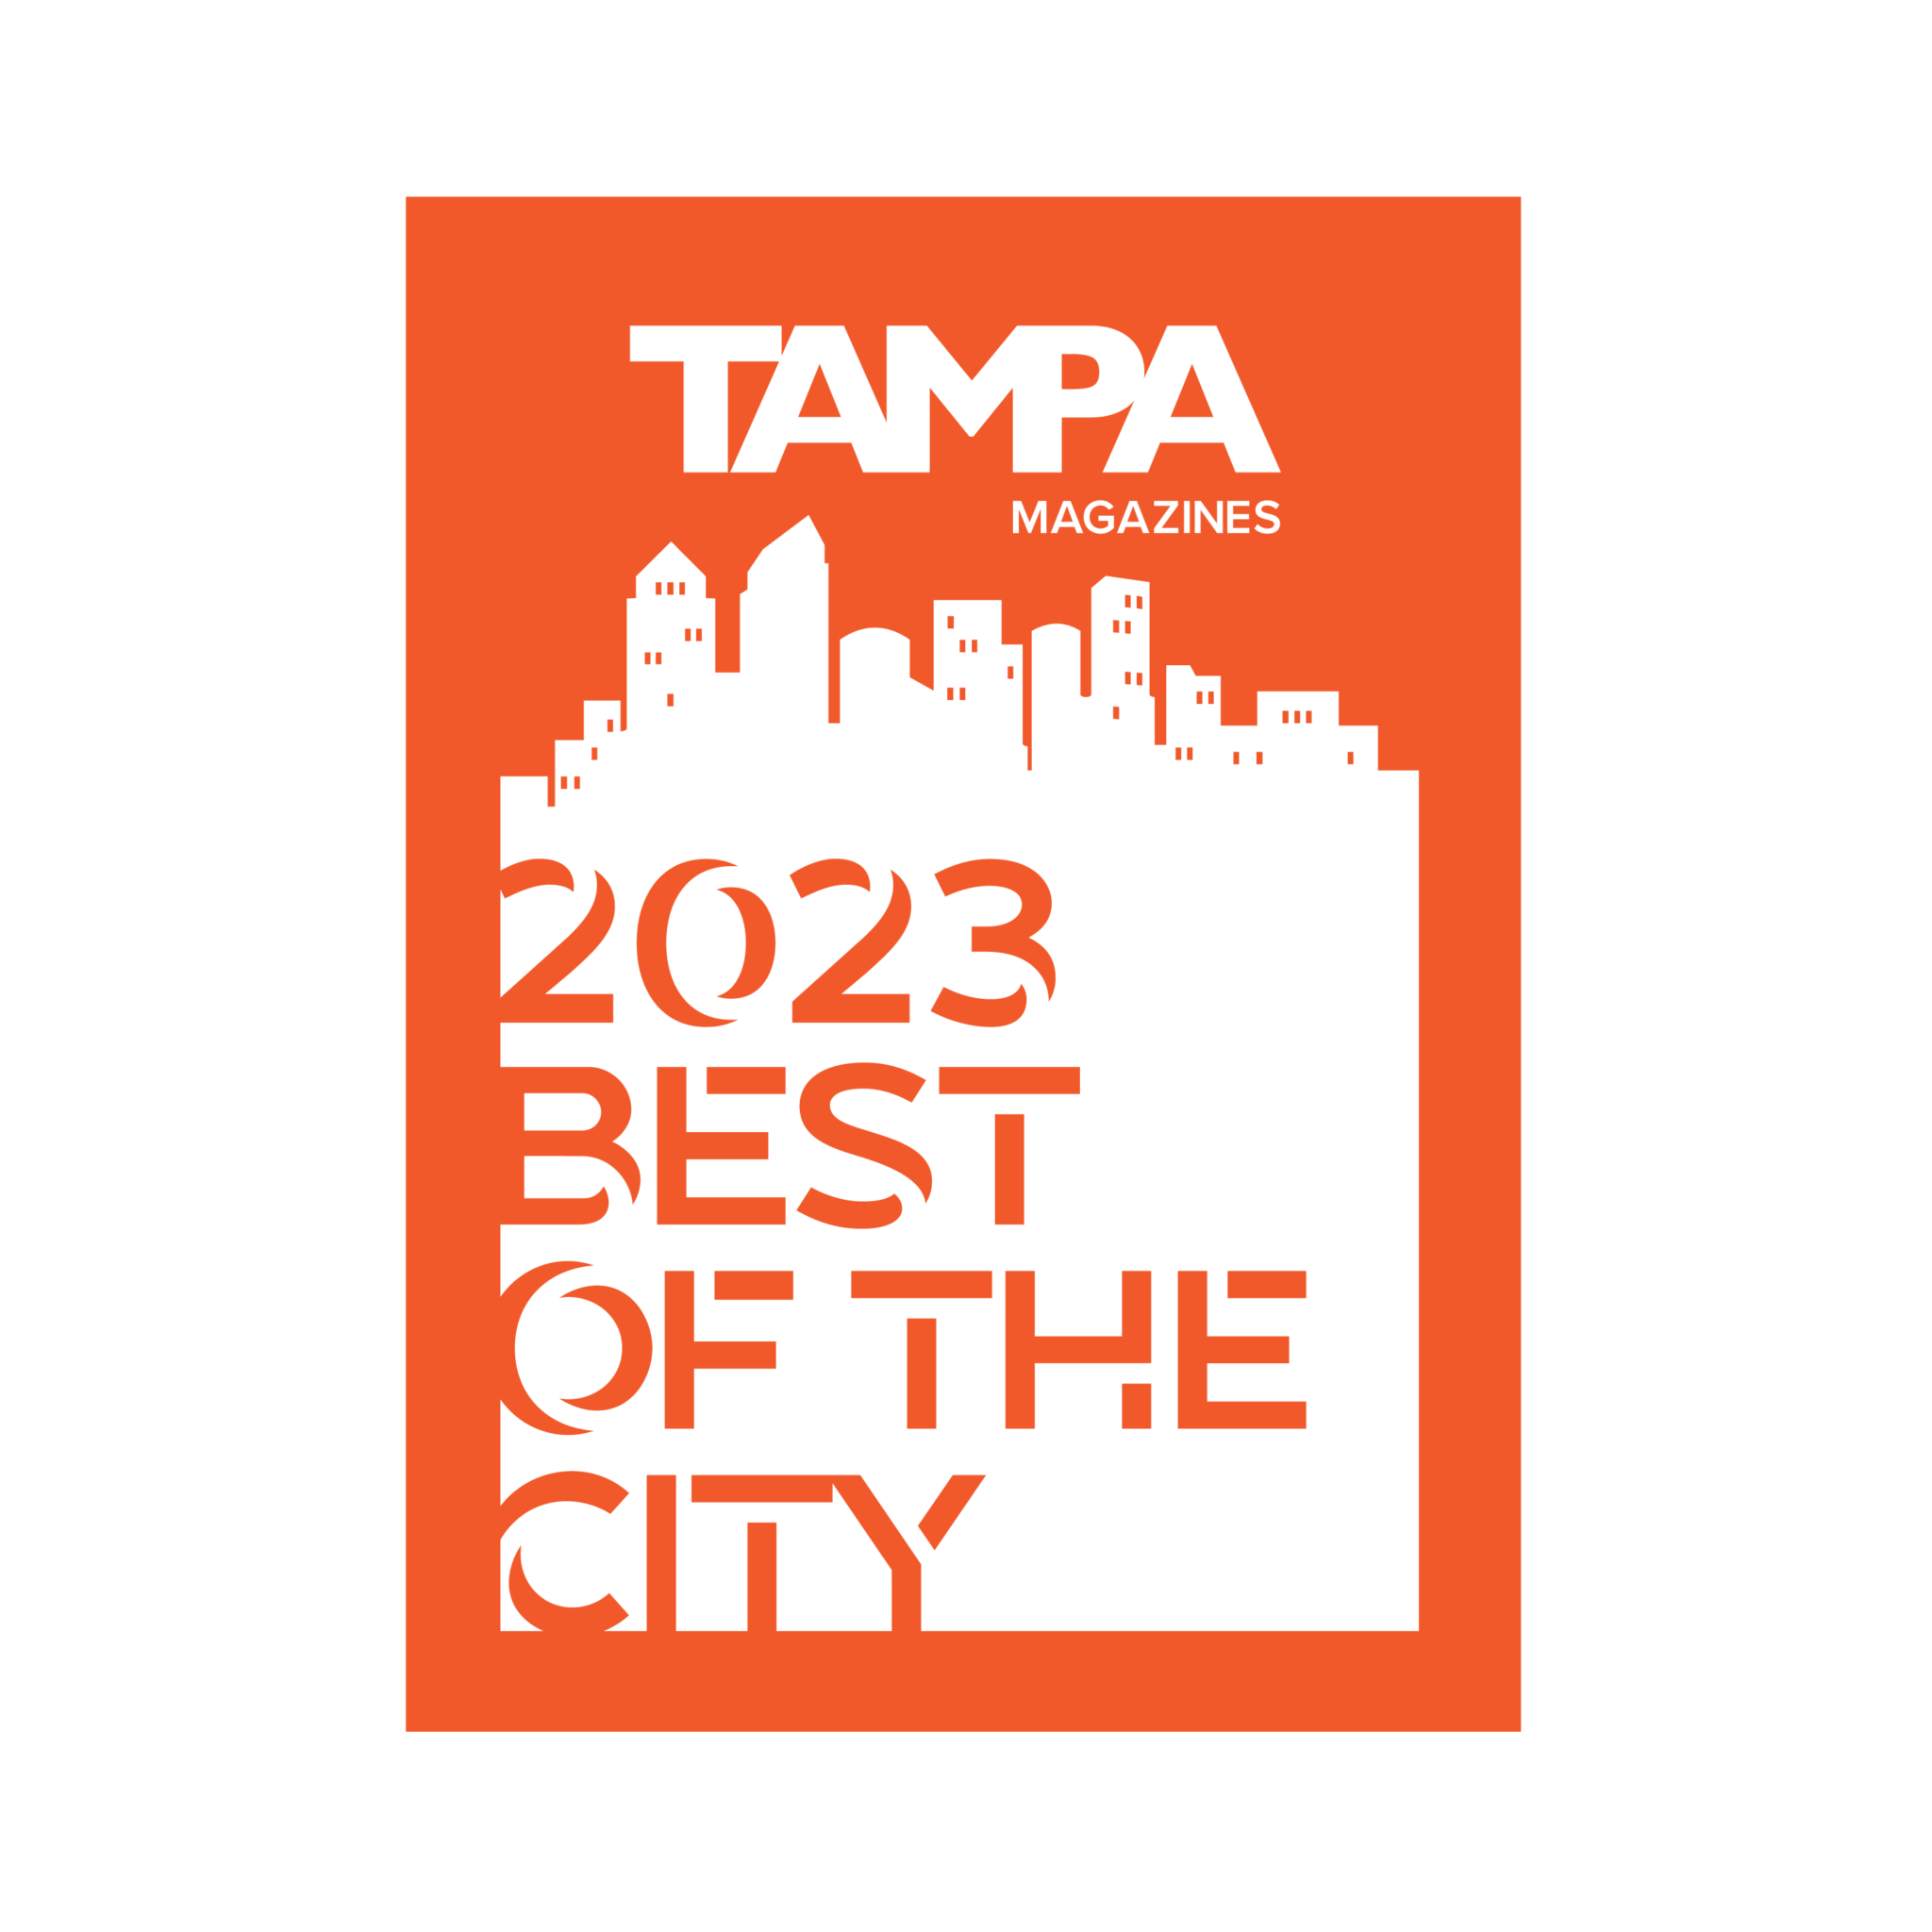 TAMPA MAGAZINES 2023 BEST OF THE CITY